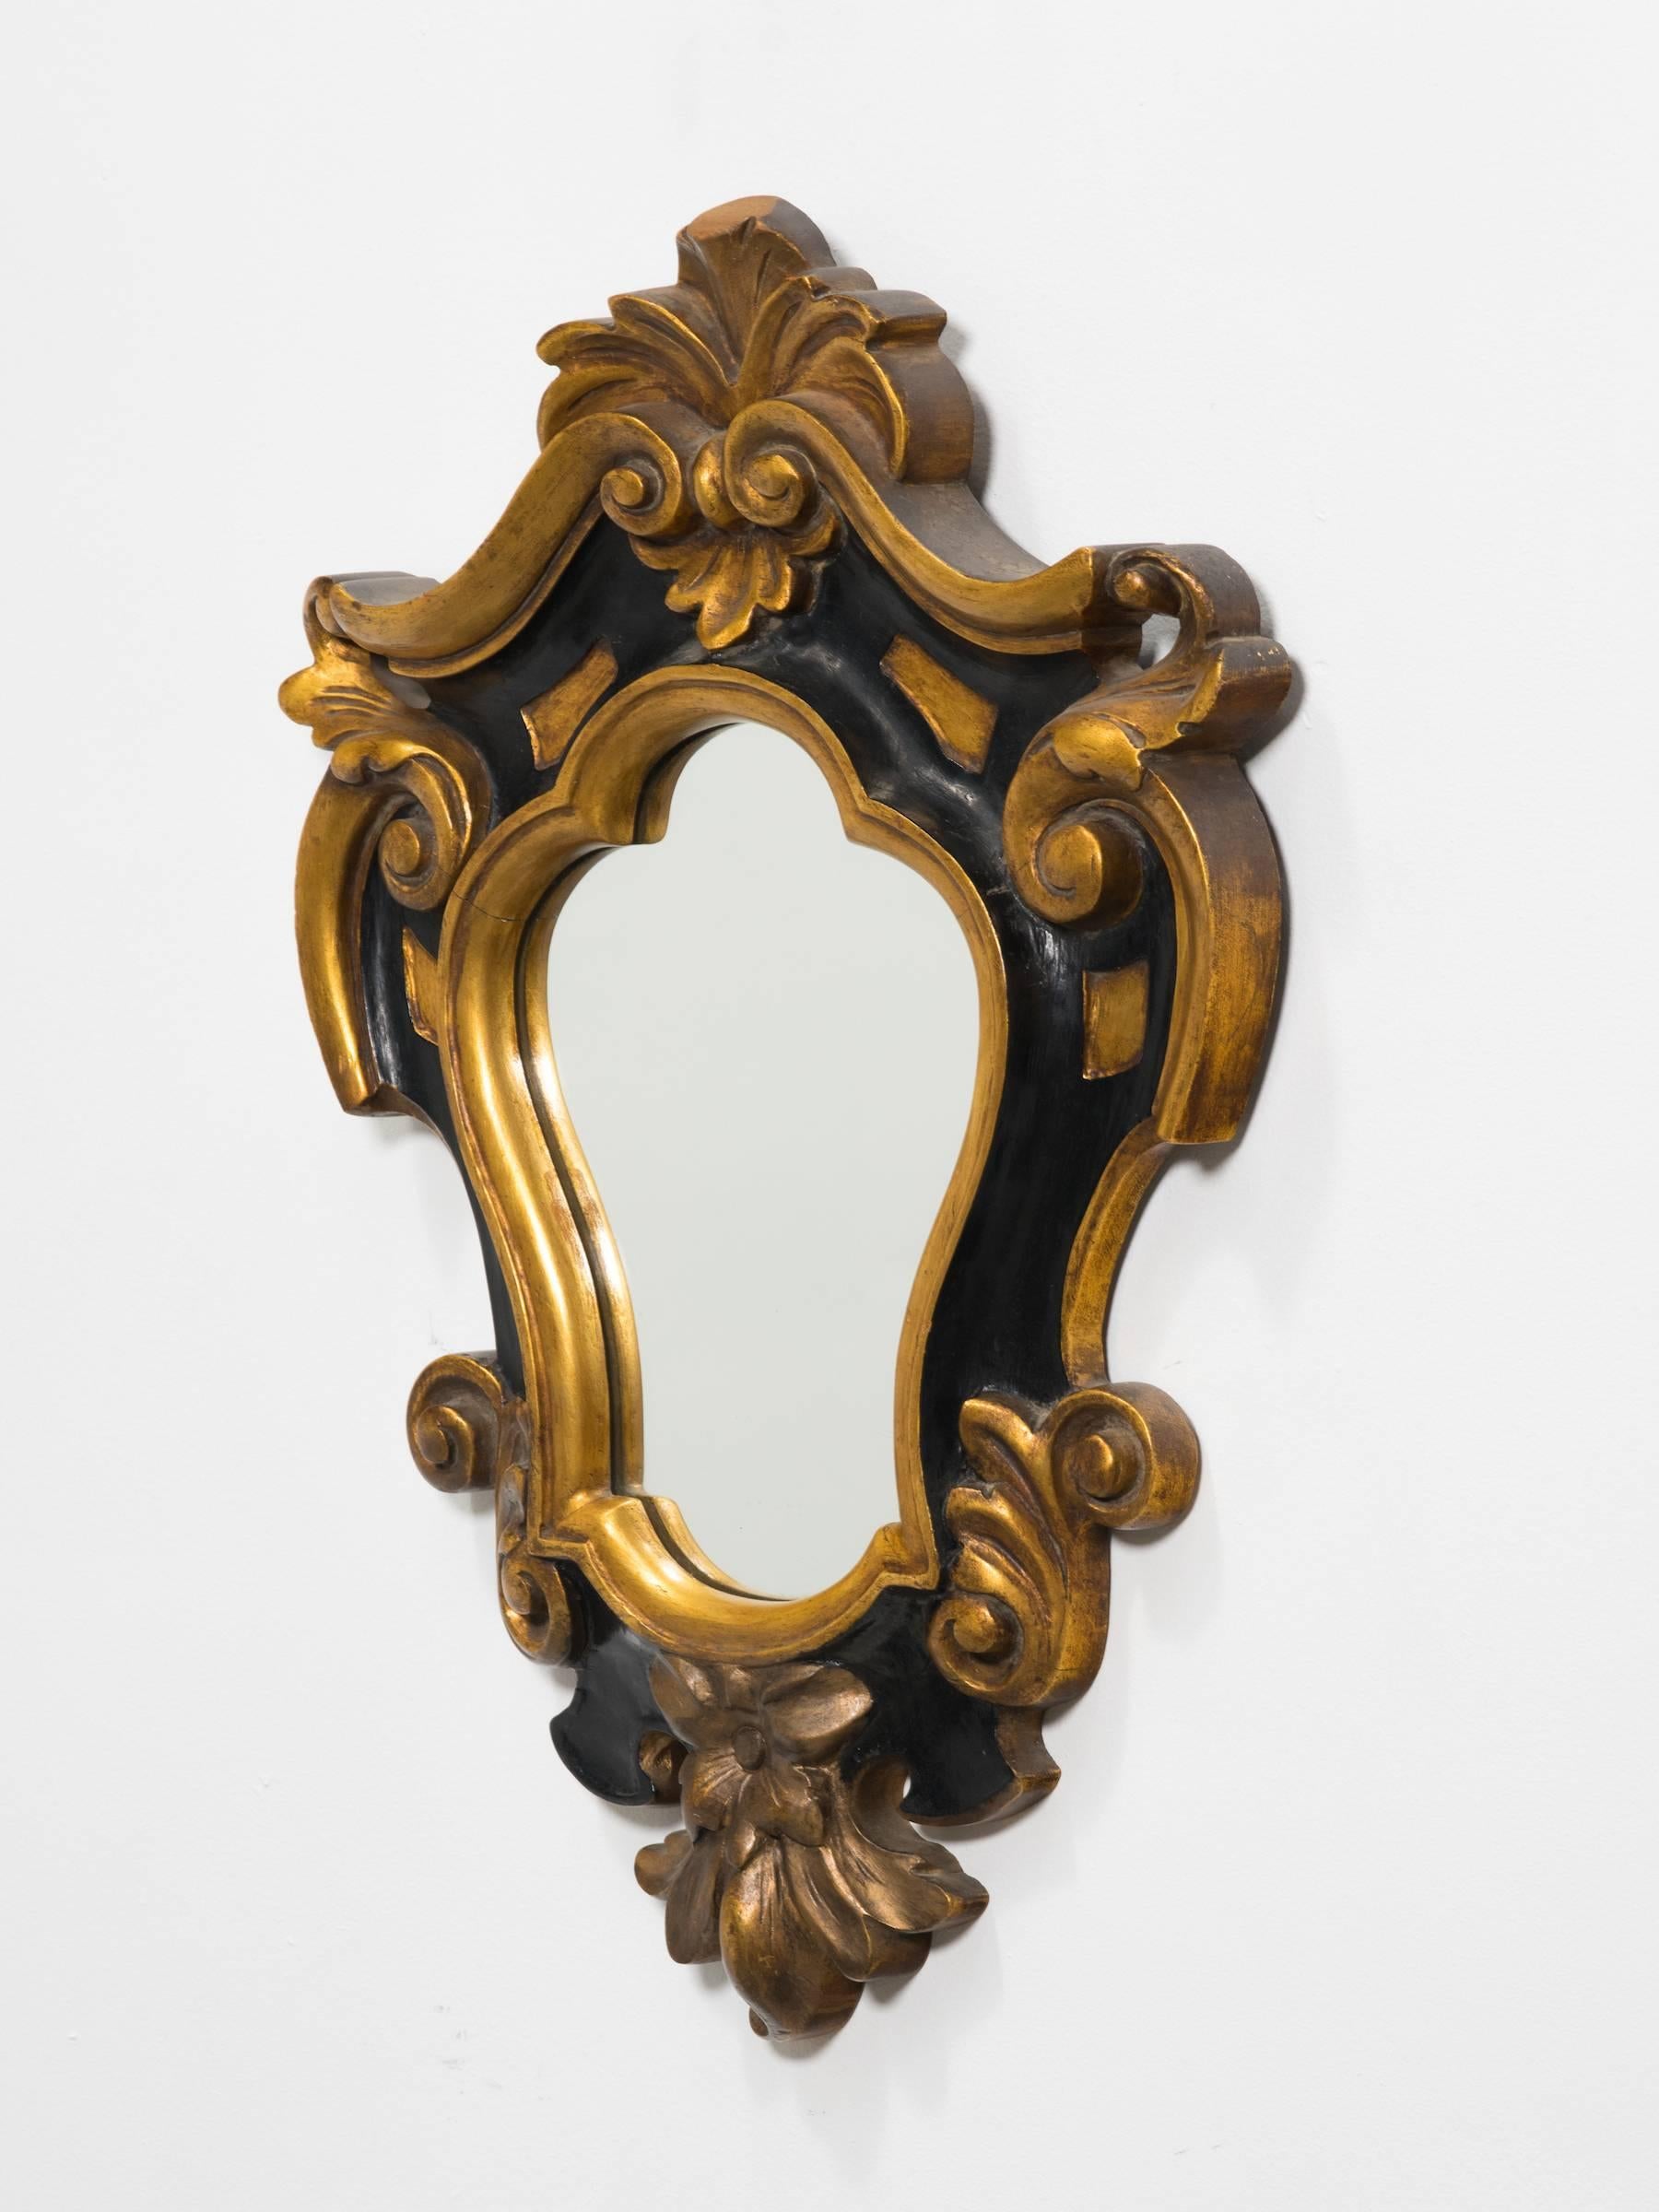 1930s carved wood decorative Rococo style  mirror.
Great metal label on the back.